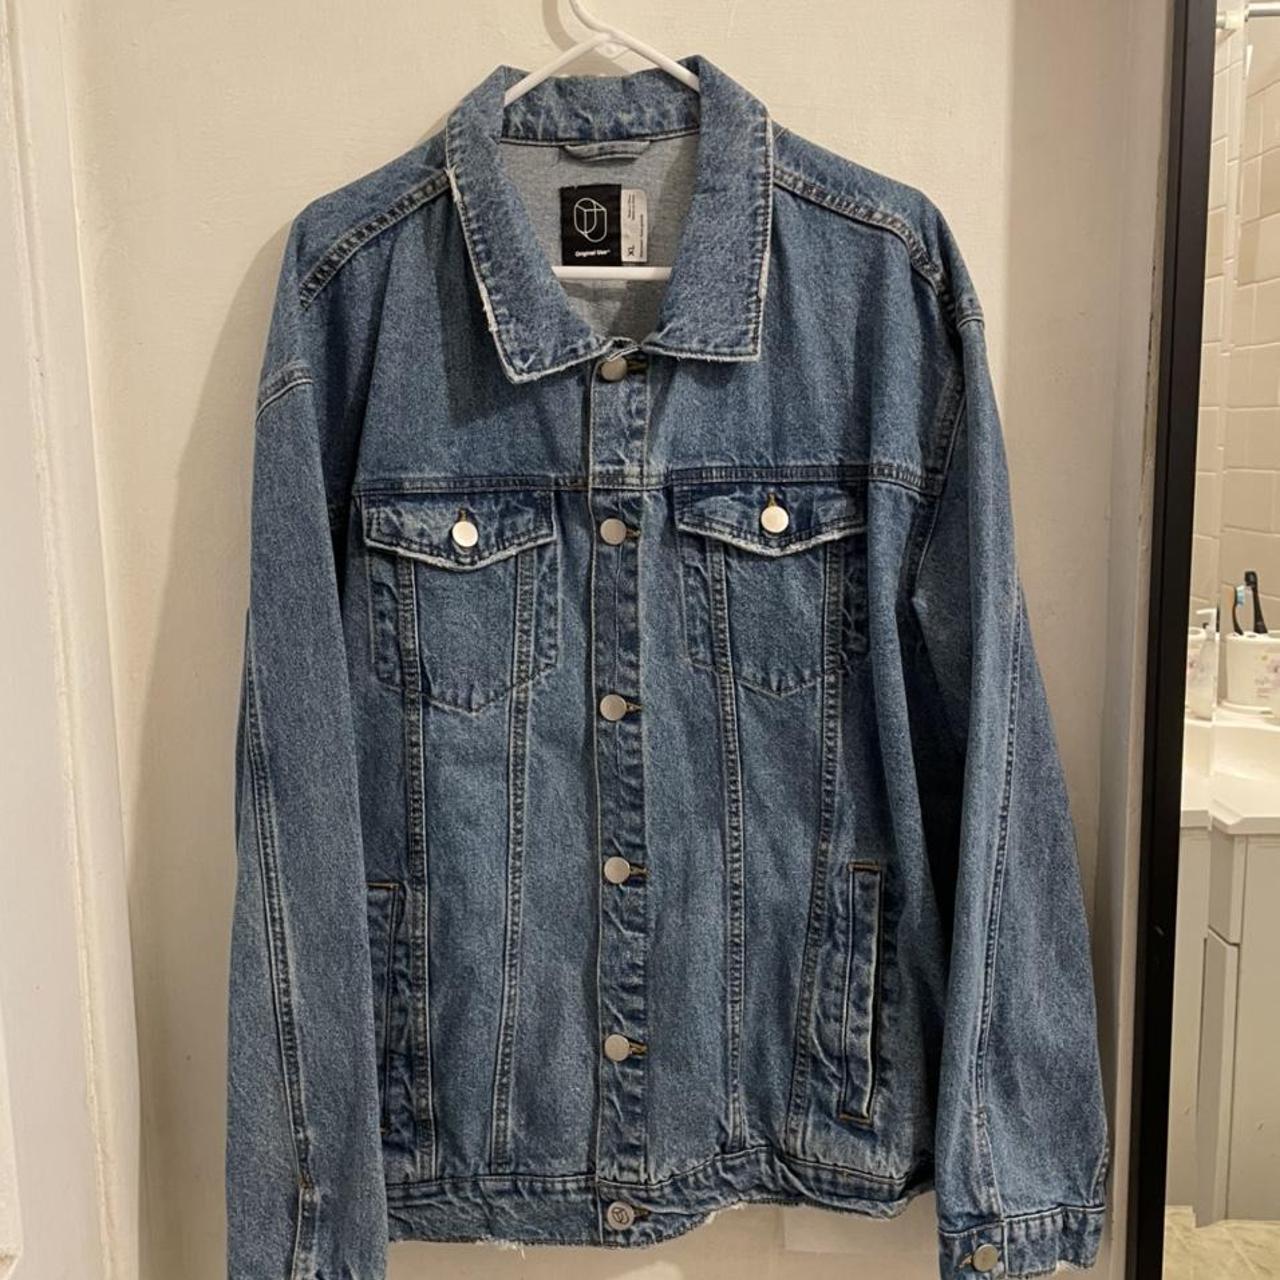 Product Image 1 - Oversized blue Jean jacket from